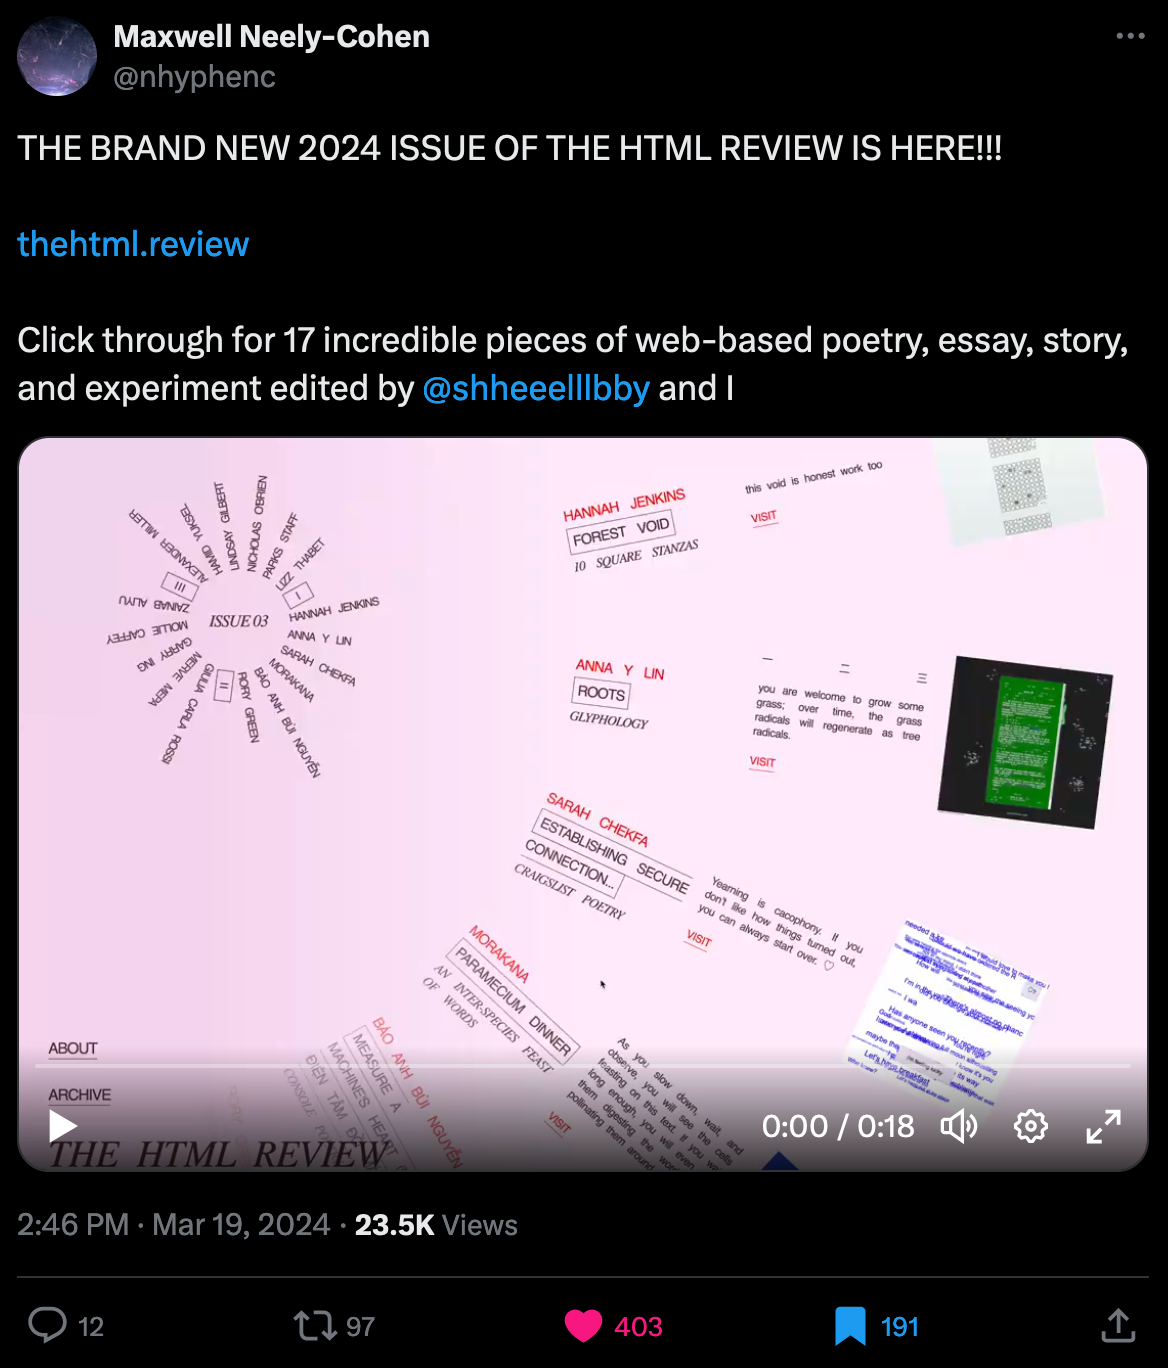 A screenshot of an image showing the HTML review